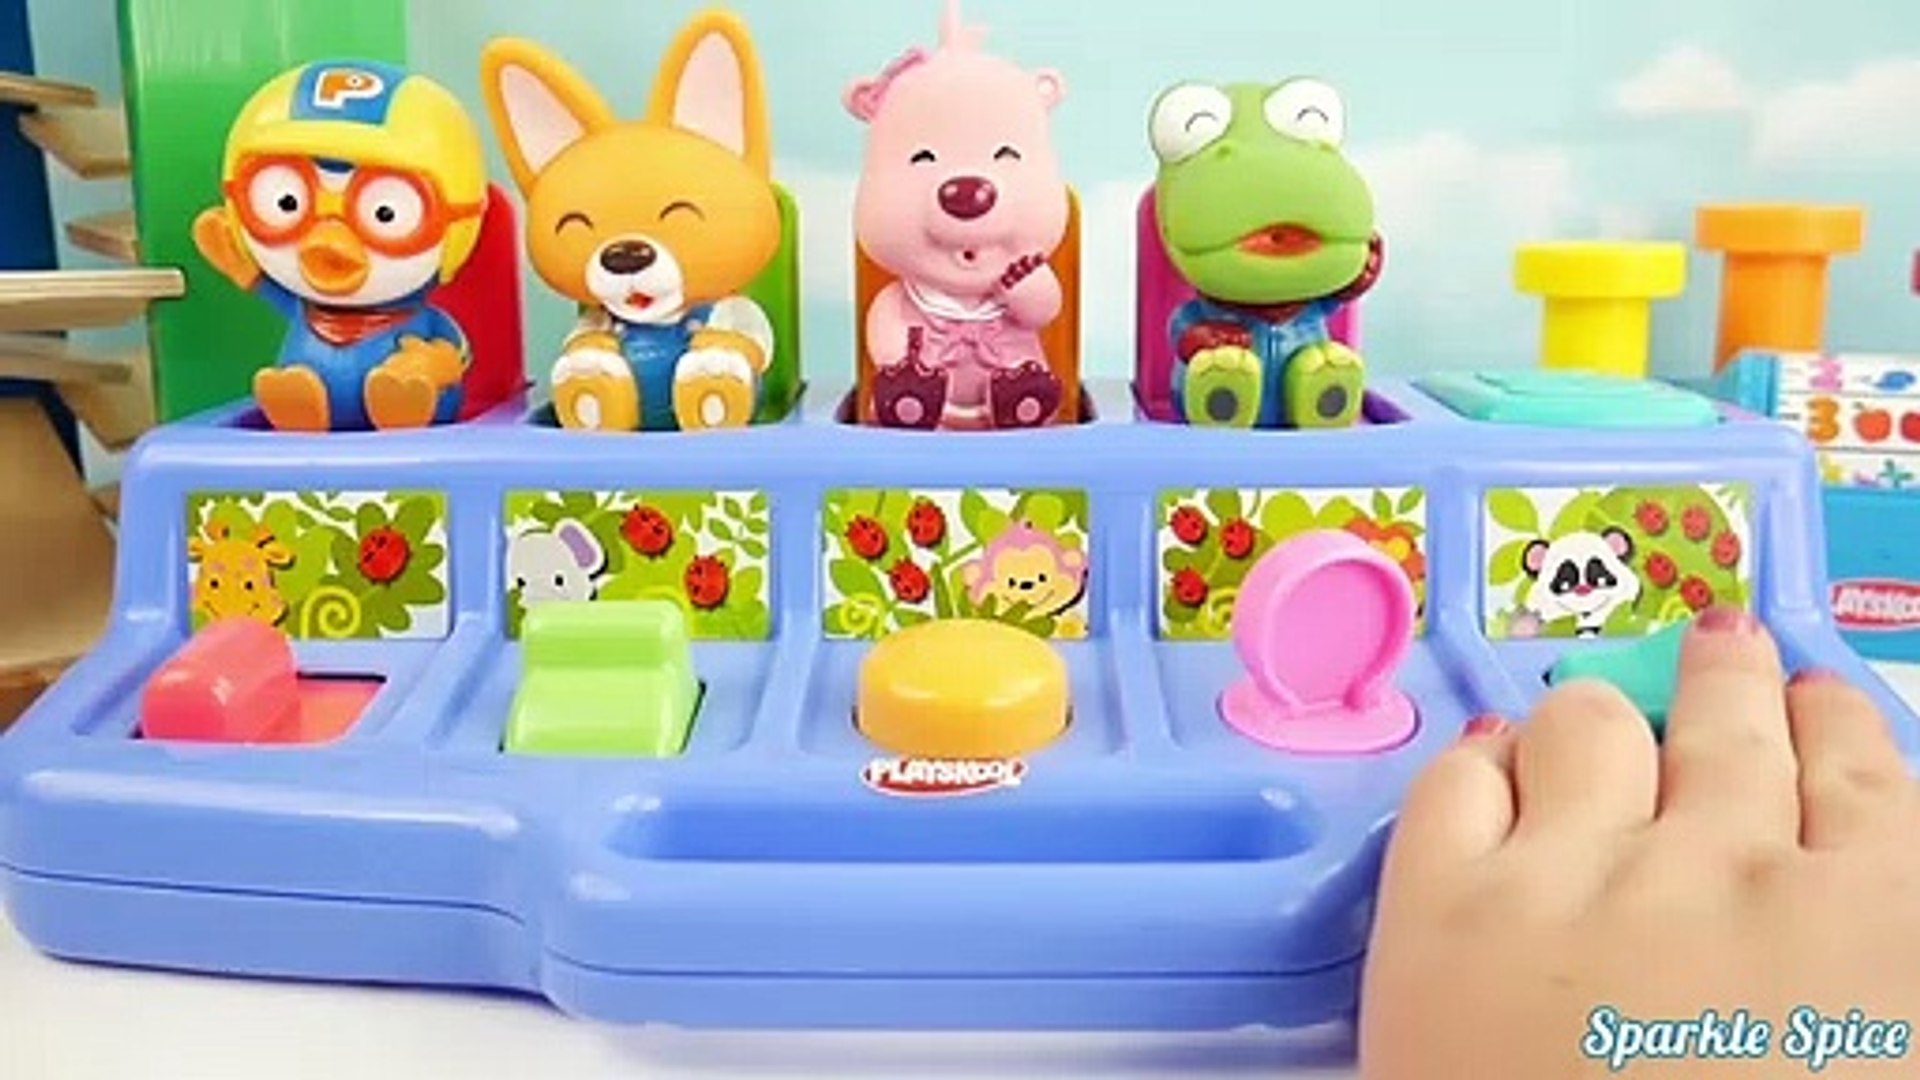 Pororo pop up toys for kids - video Dailymotion